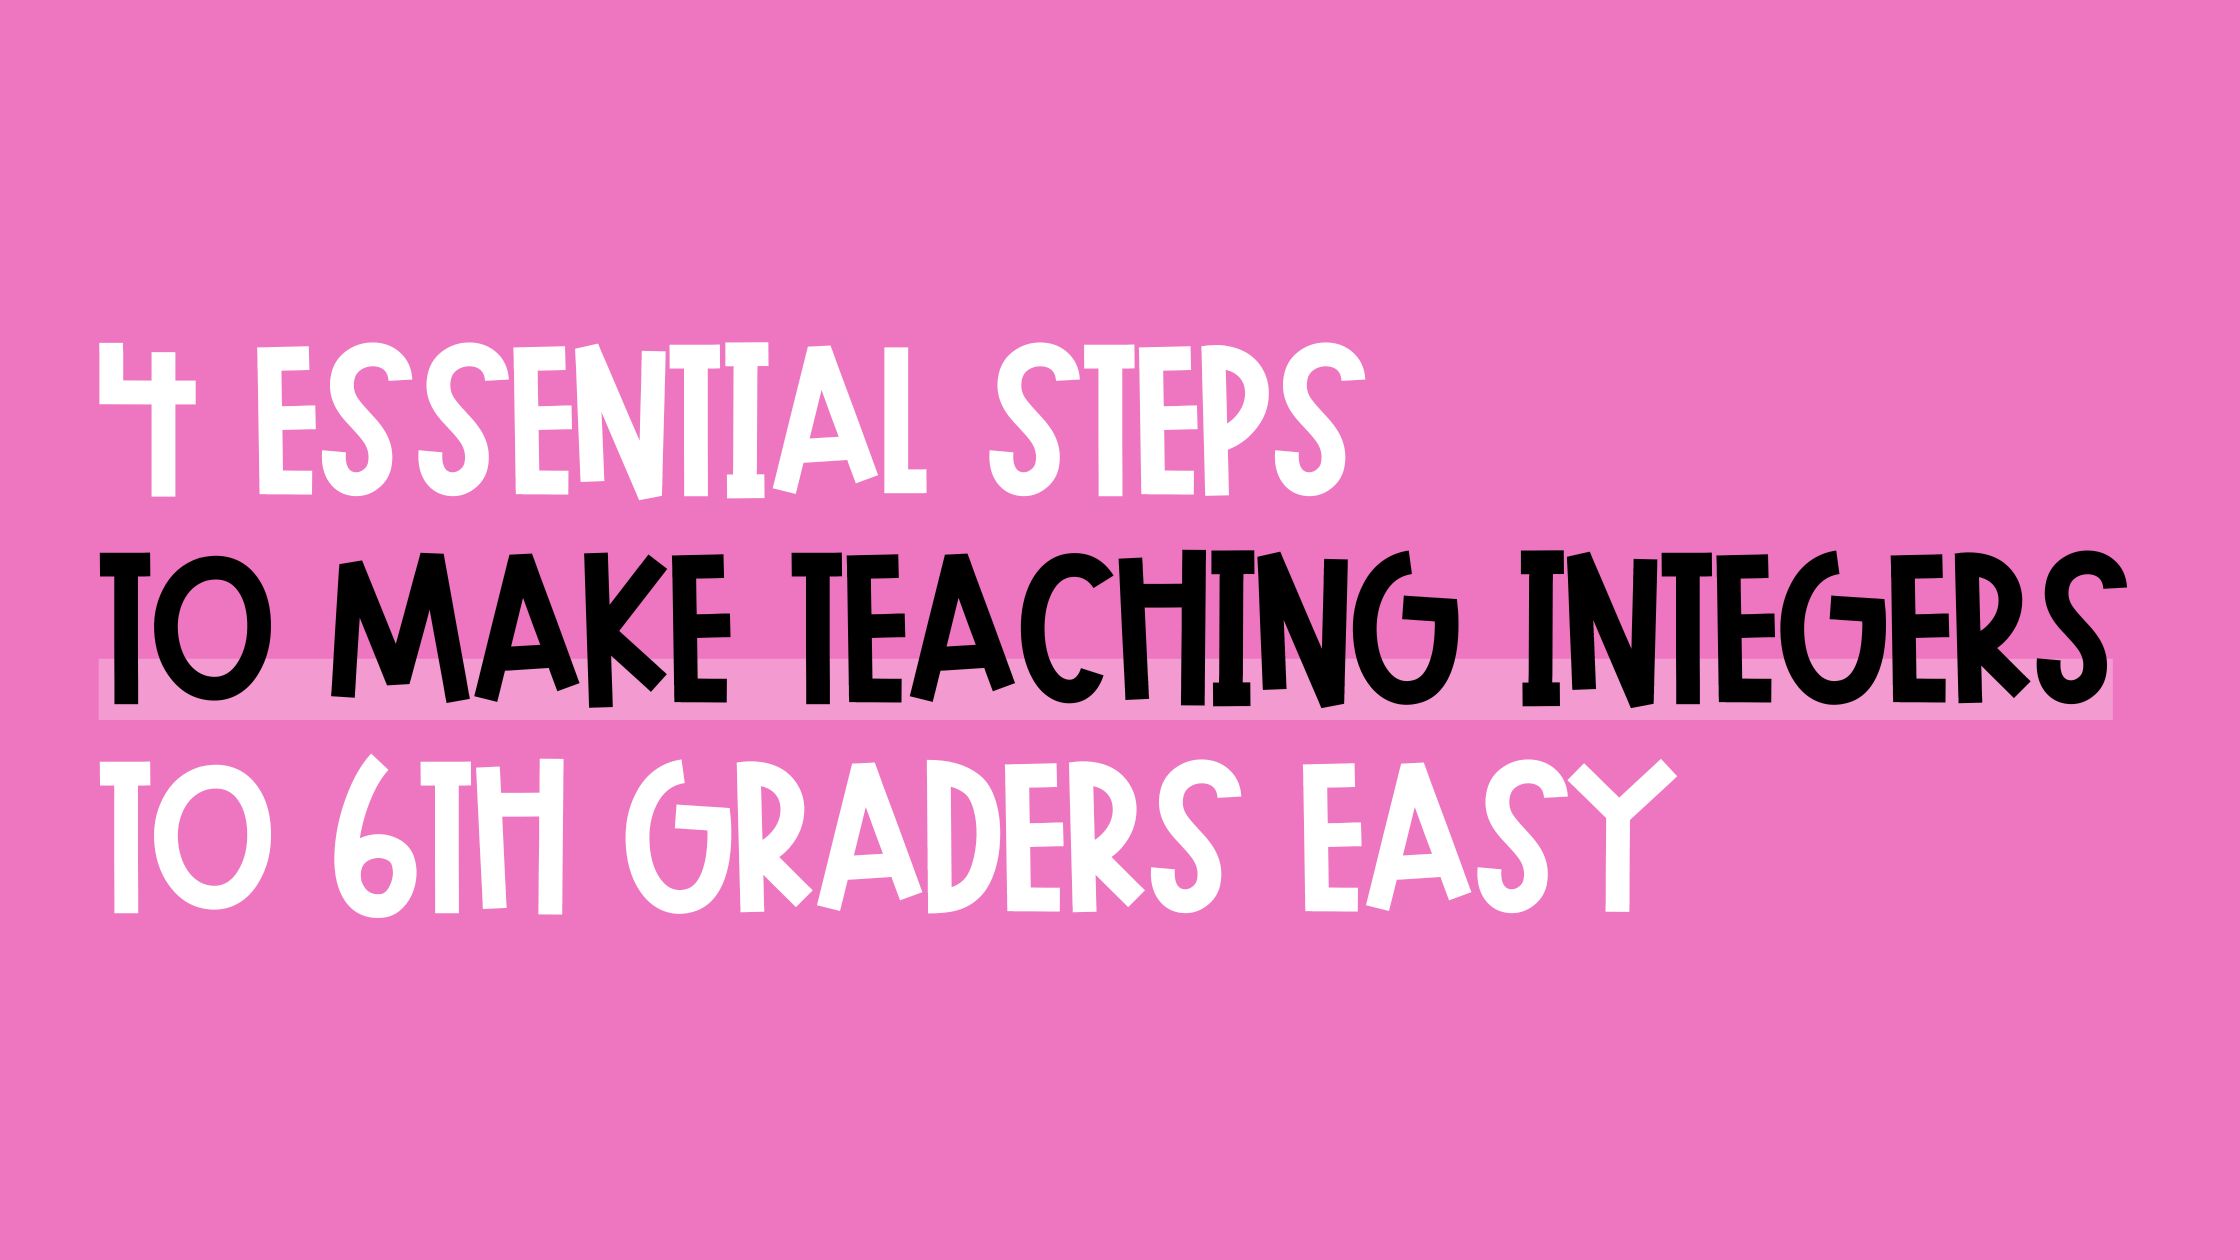 4 Essential Steps to Make Introducing Integers to 6th Graders Easy Blog Post Header Image